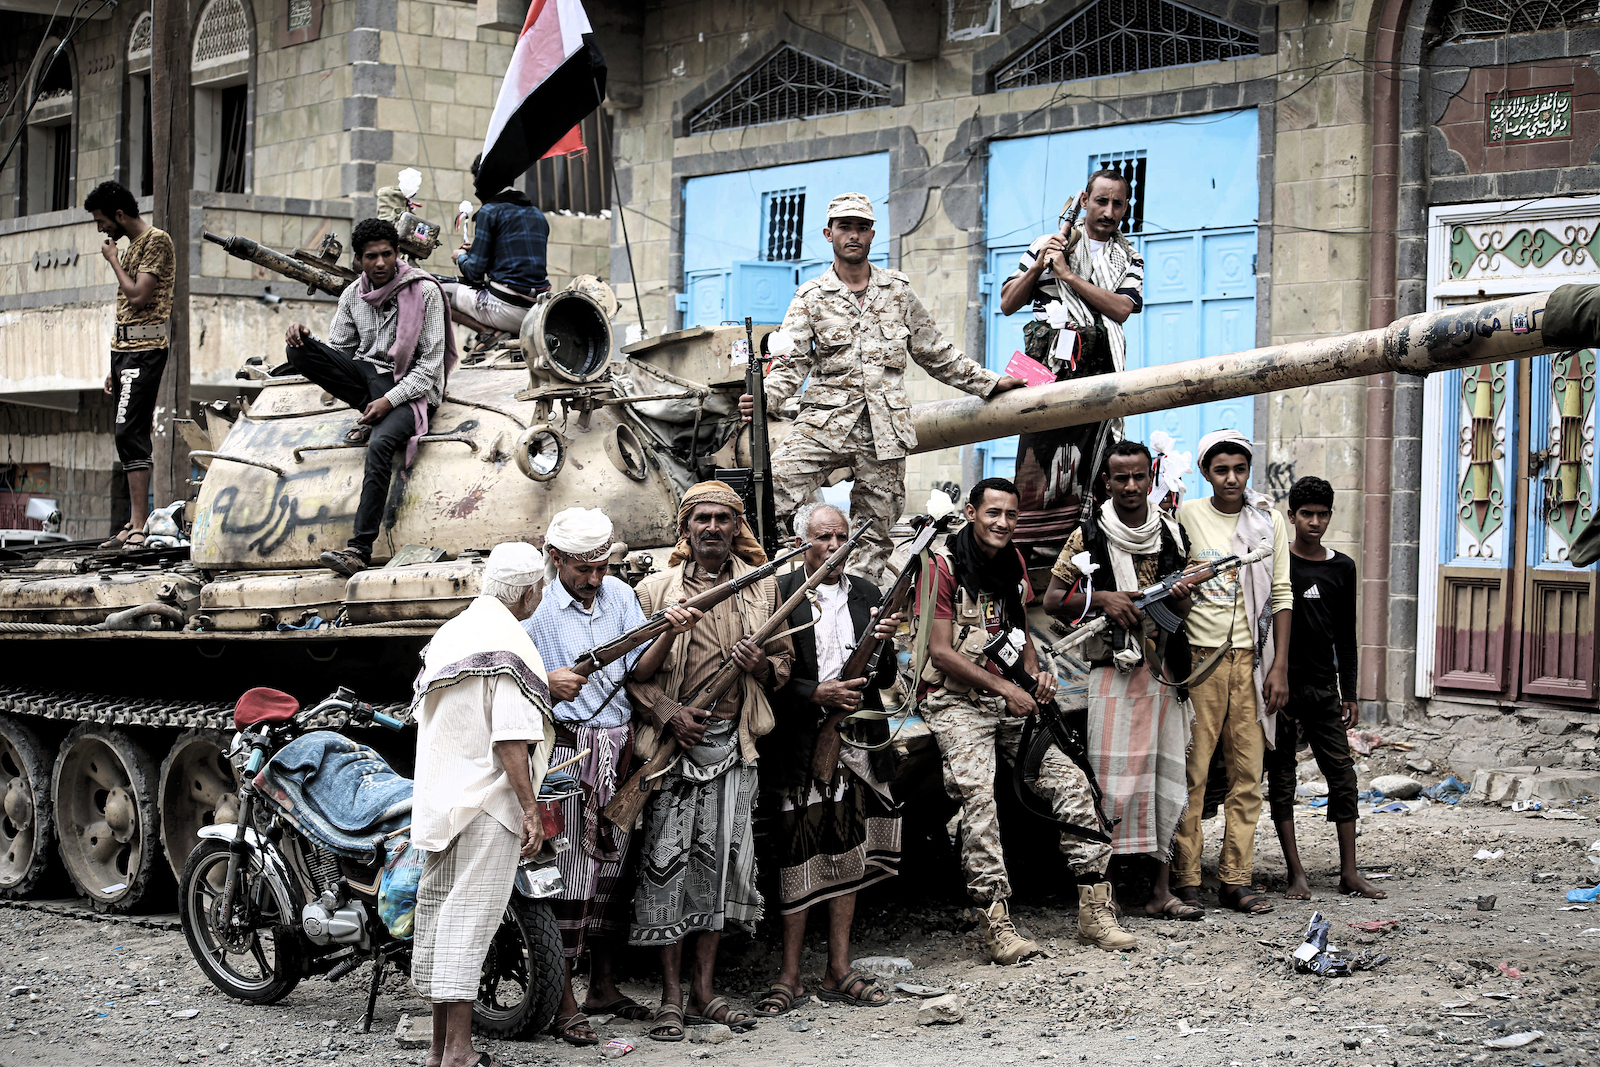 Soldiers in Yemen fighting the Houthis